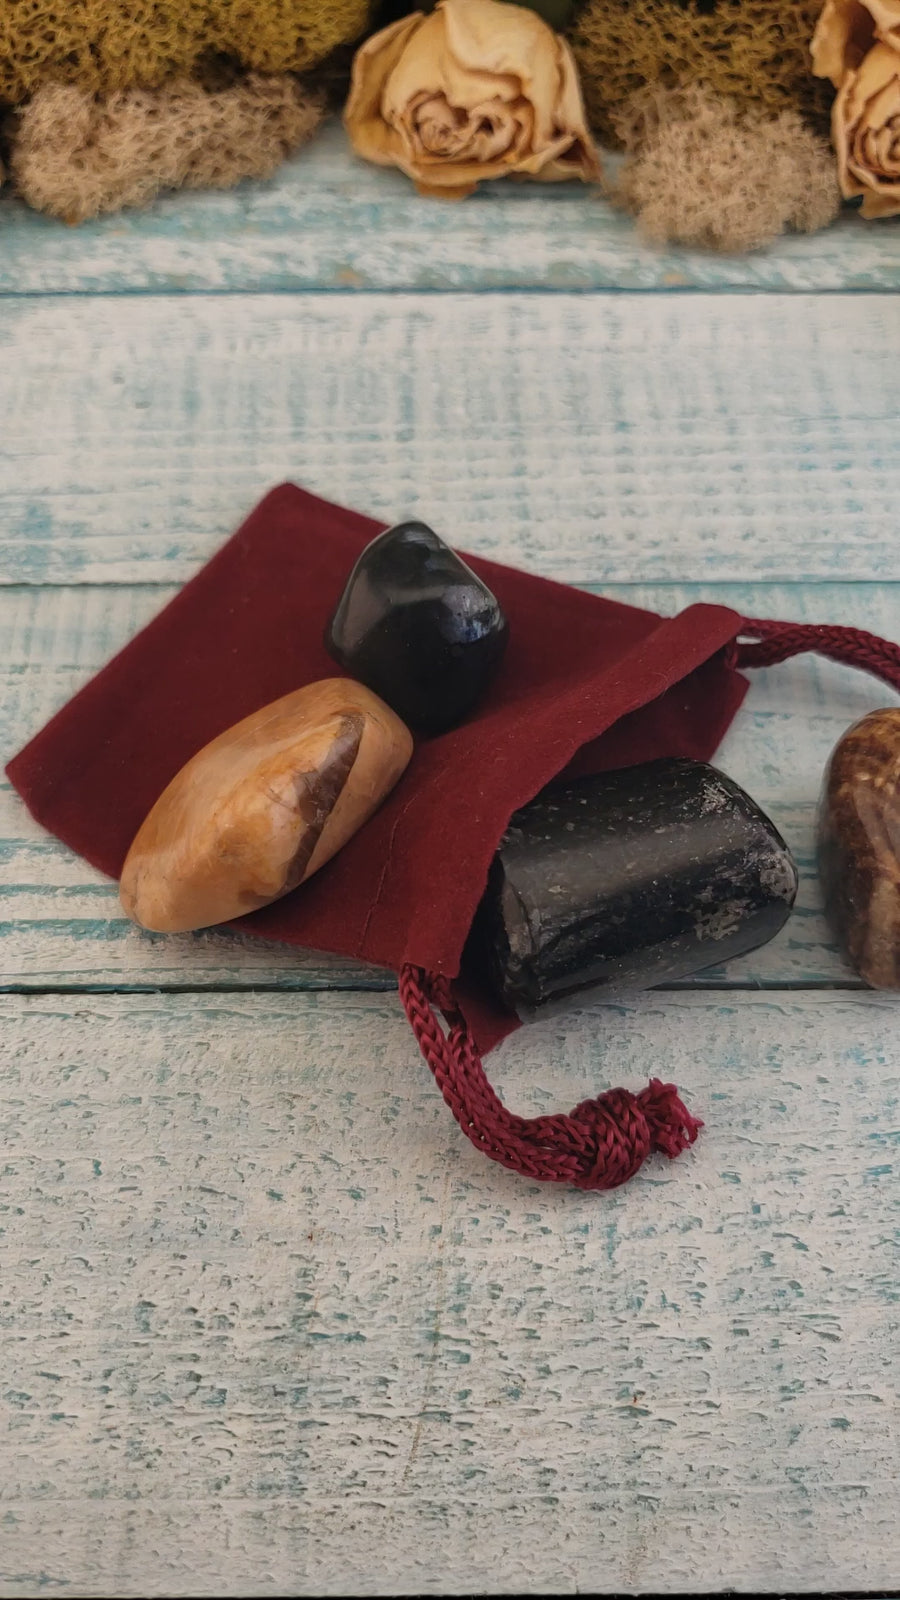 Inspiration & Learning - Set of Four Tumbled Stones with Pouch - Video